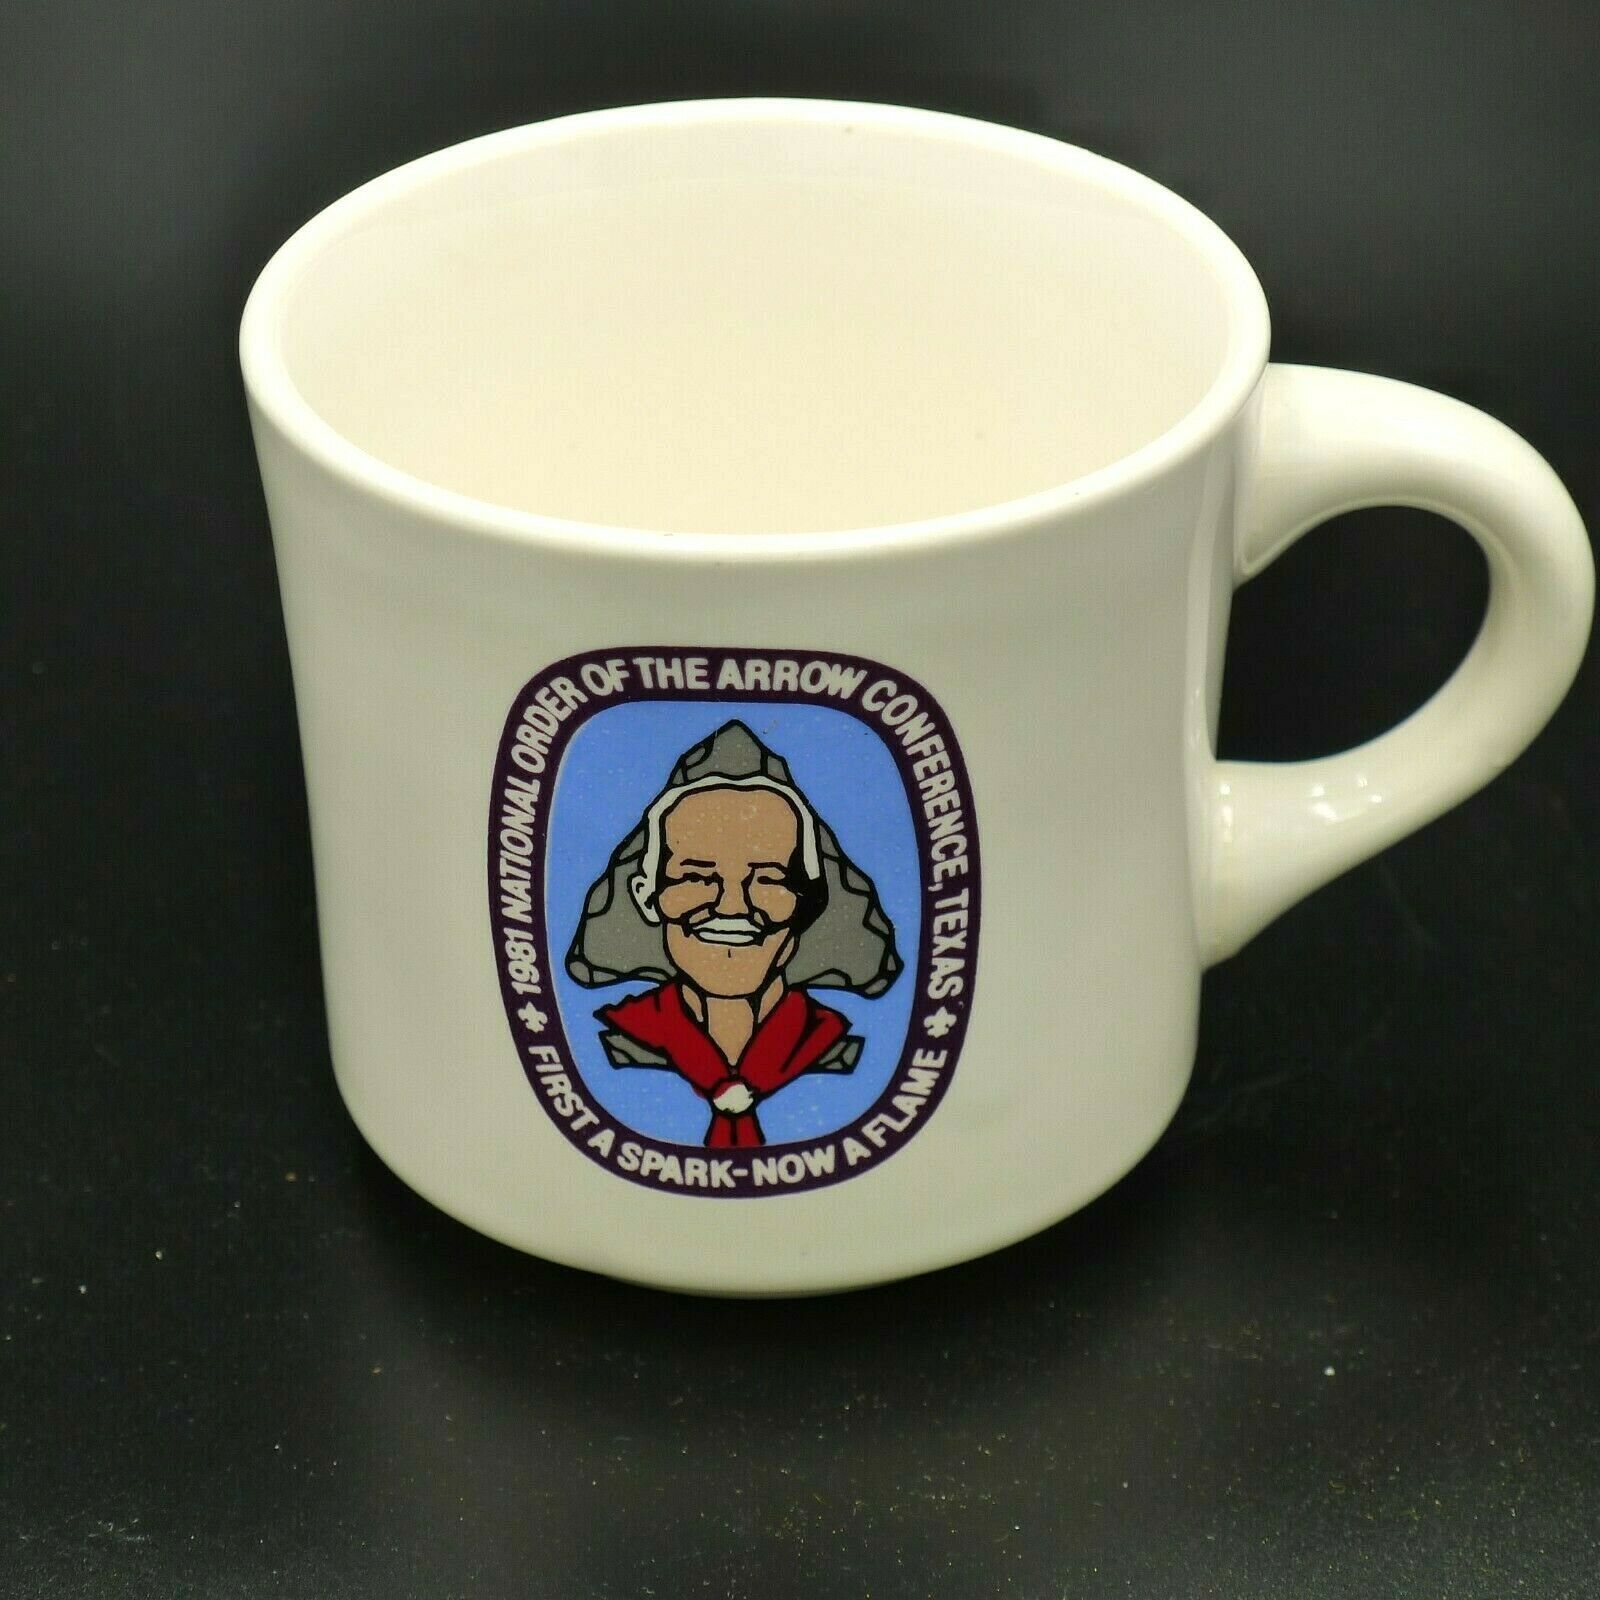 Primary image for 1981 Boy Scout National Order of the Arrow Conference Texas Coffee Cup  OA Mug